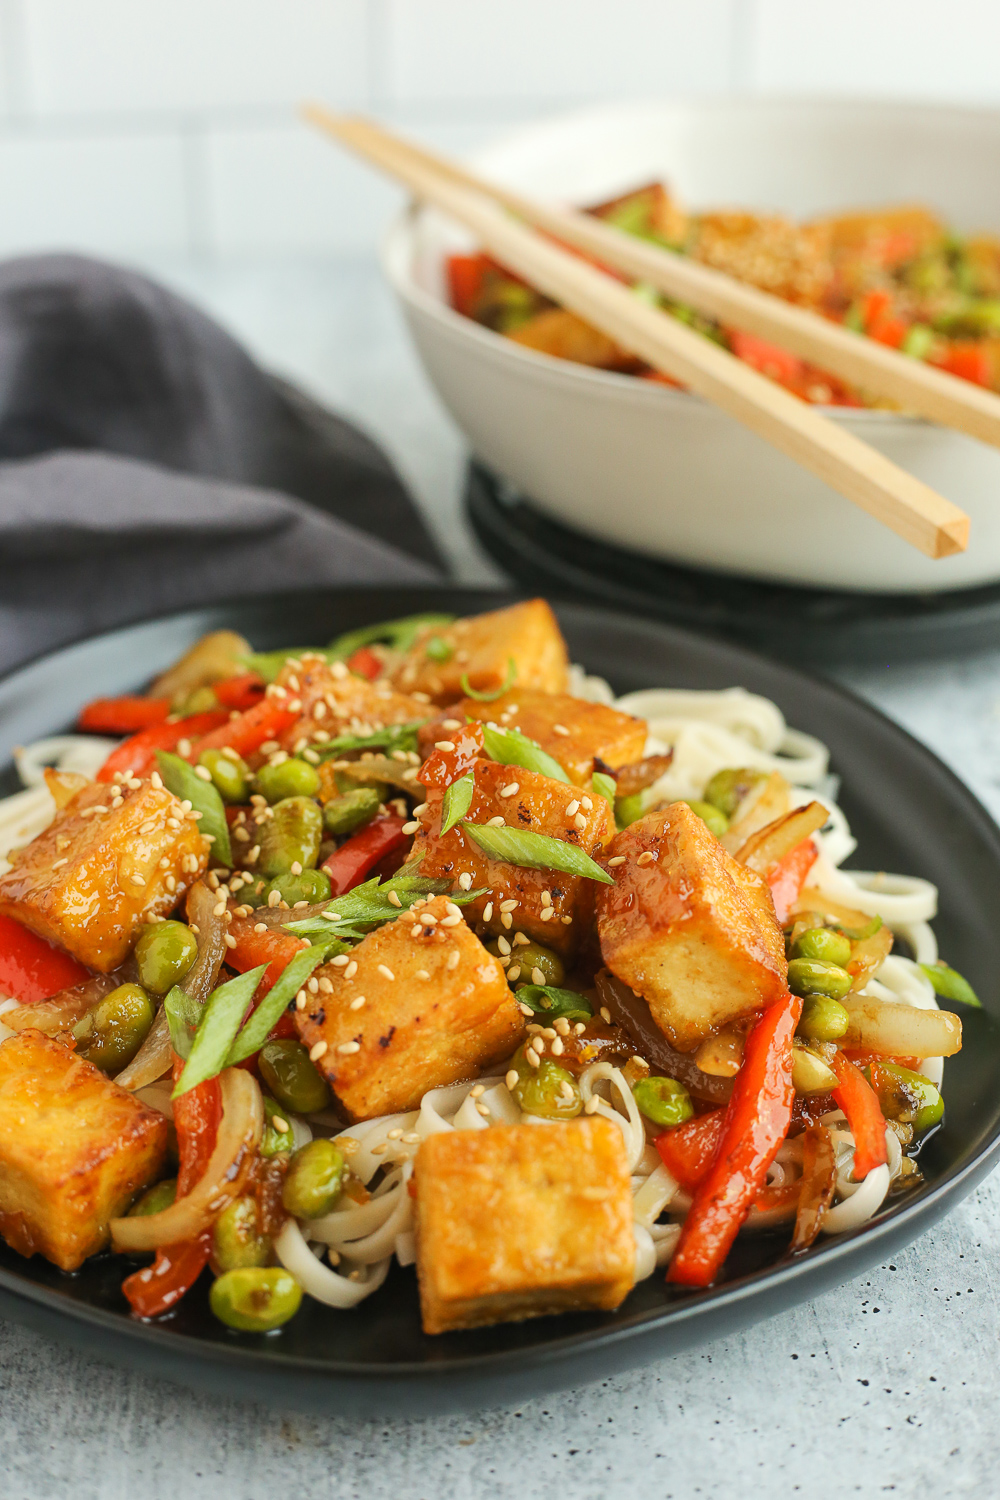 A crispy orange tofu and vegetarian stir fry served with noodles on a black plate with a bowl and chopsticks in the background